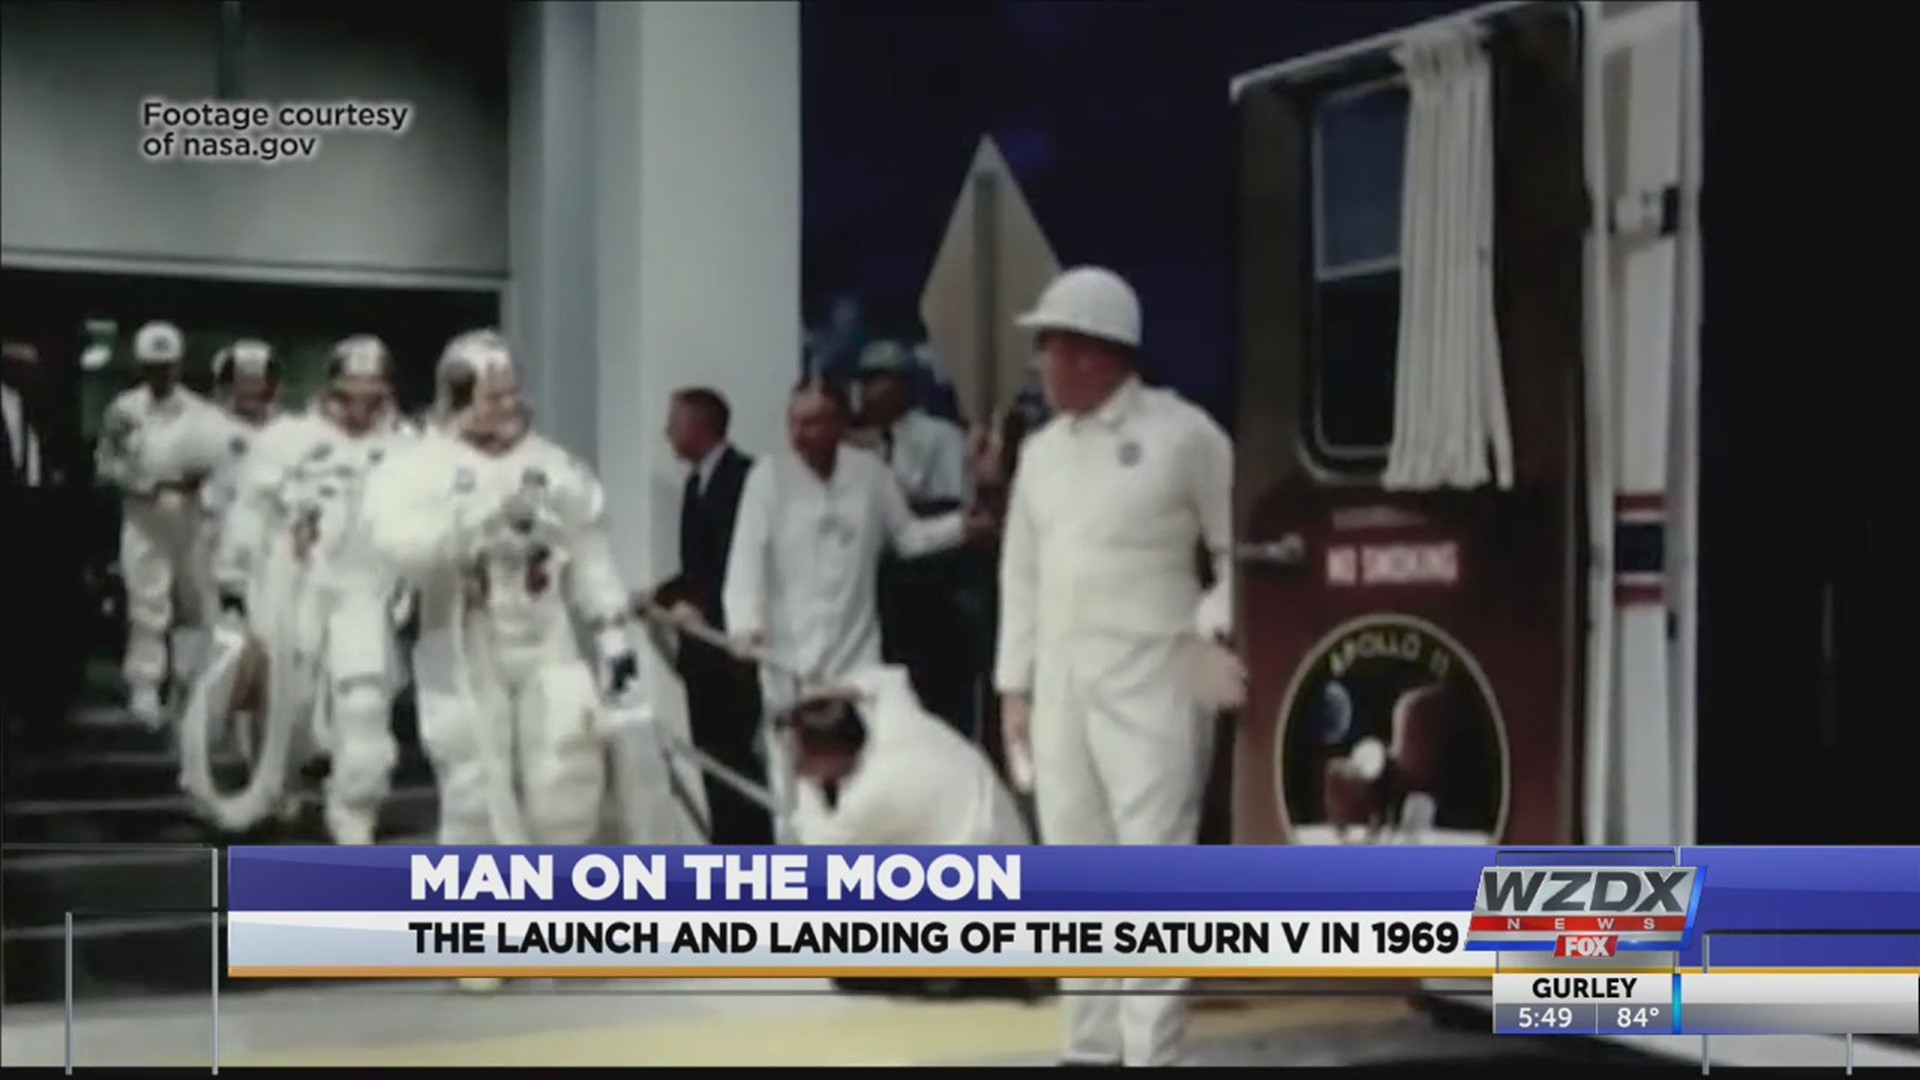 50 years ago, a rocket made in Huntsville took American Astronauts on their grand voyage to the moon.